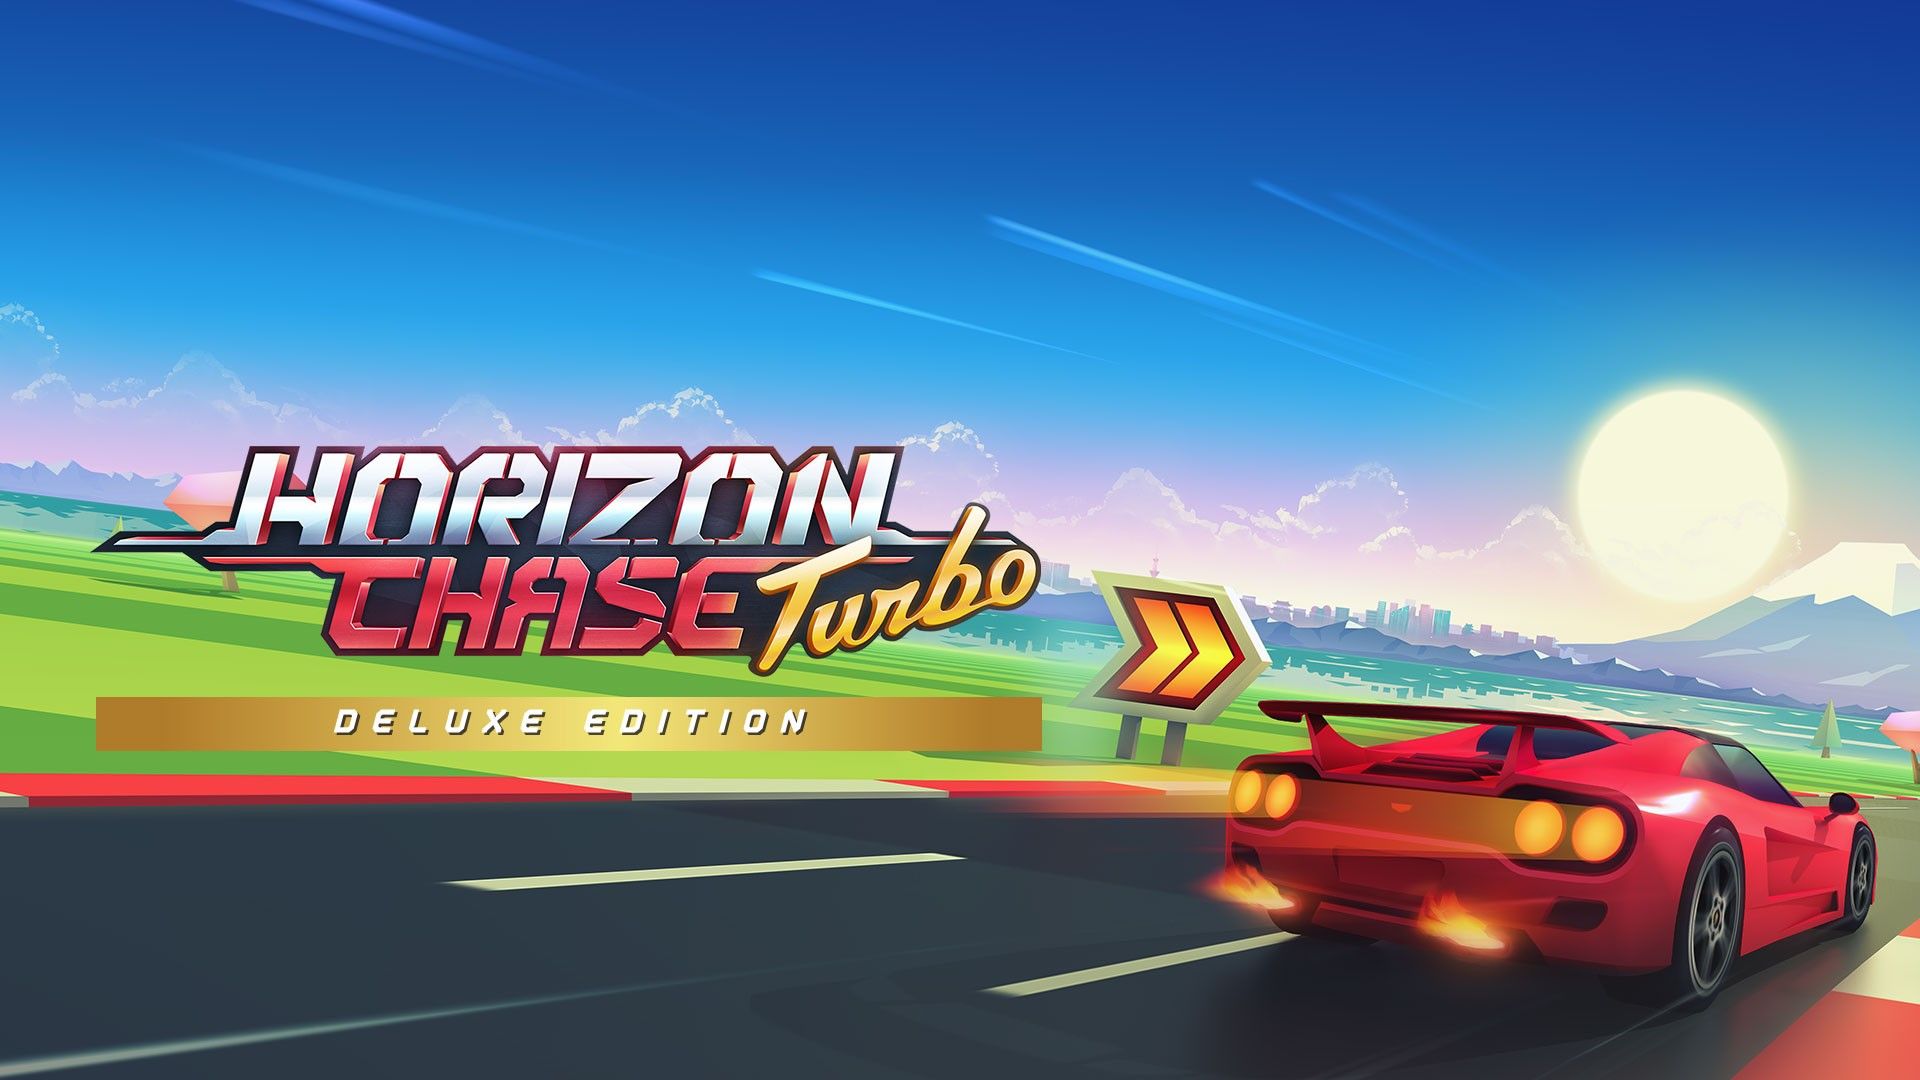 Retro Car Chase Action! HORIZON CHASE TURBO Deluxe Edition heading to PS4 (SEA) this July 28